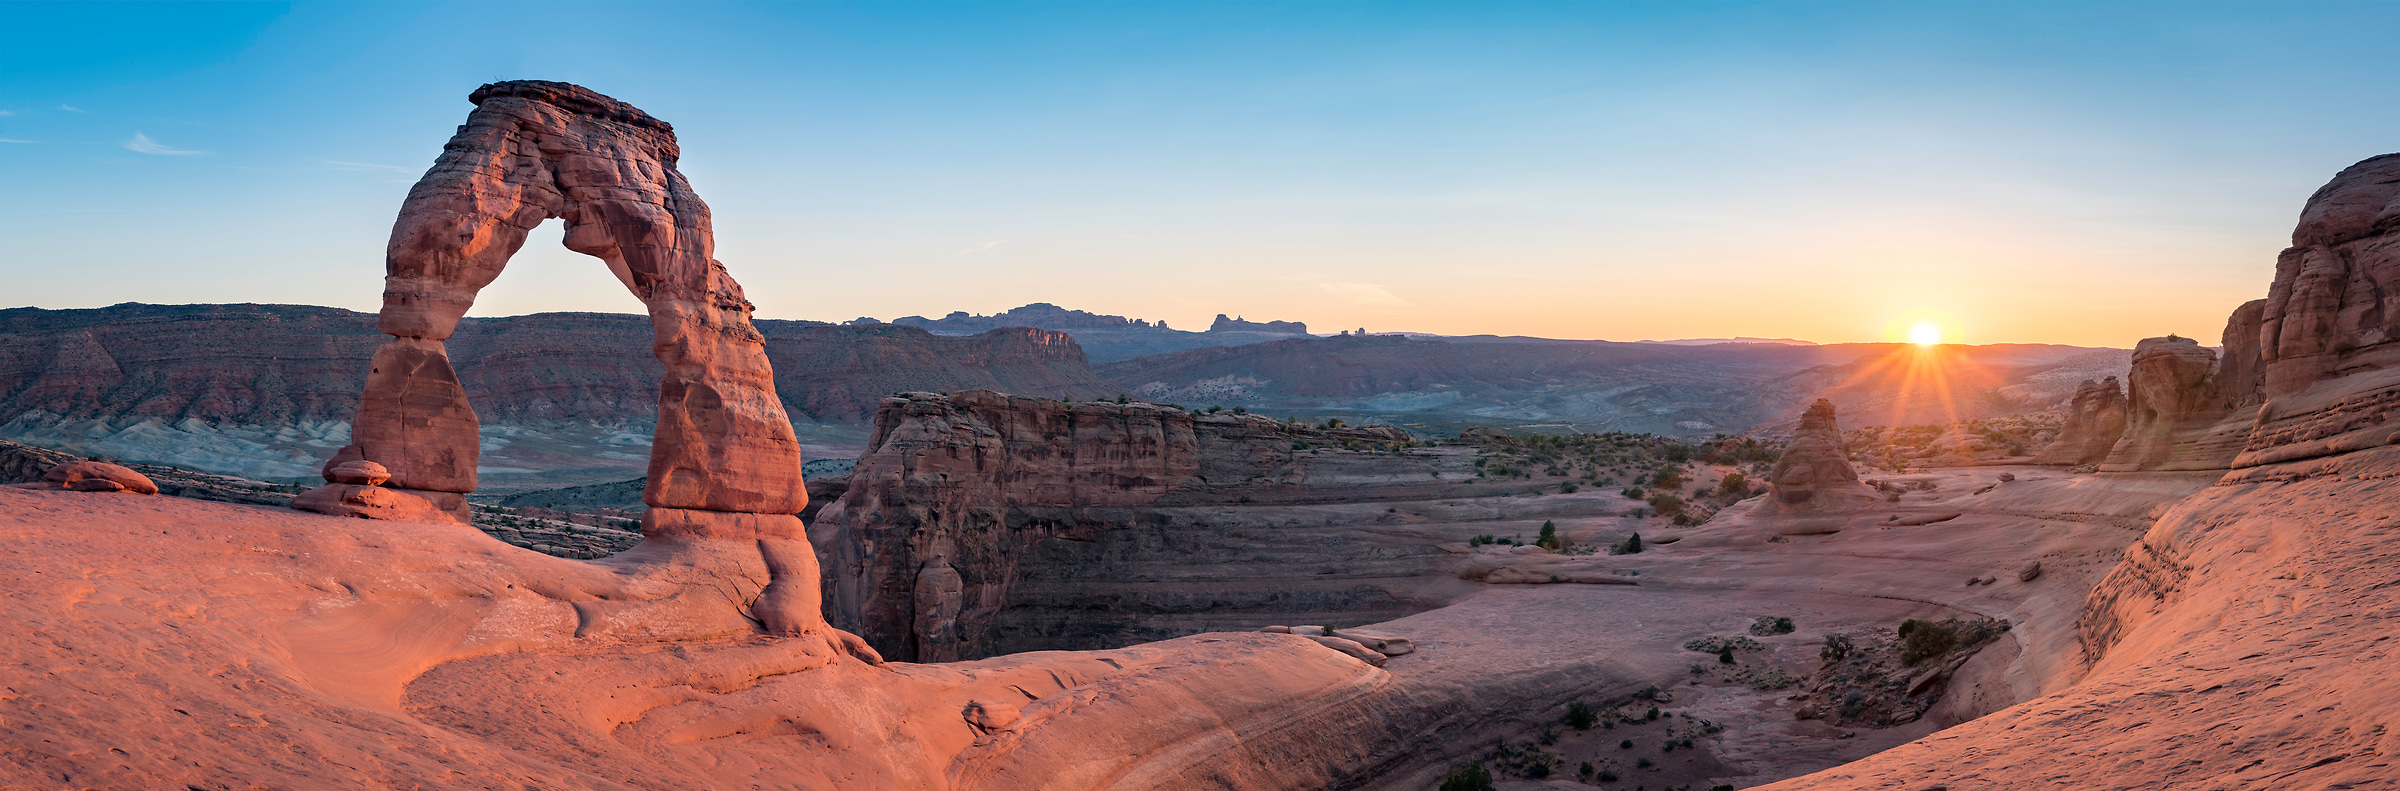 365 megapixels! A very high resolution, large-format VAST photo print of an American panorama landscape at sunset; fine art photo of Delicate Arch created by Justin Katz in Arches National Park, Moab, Utah